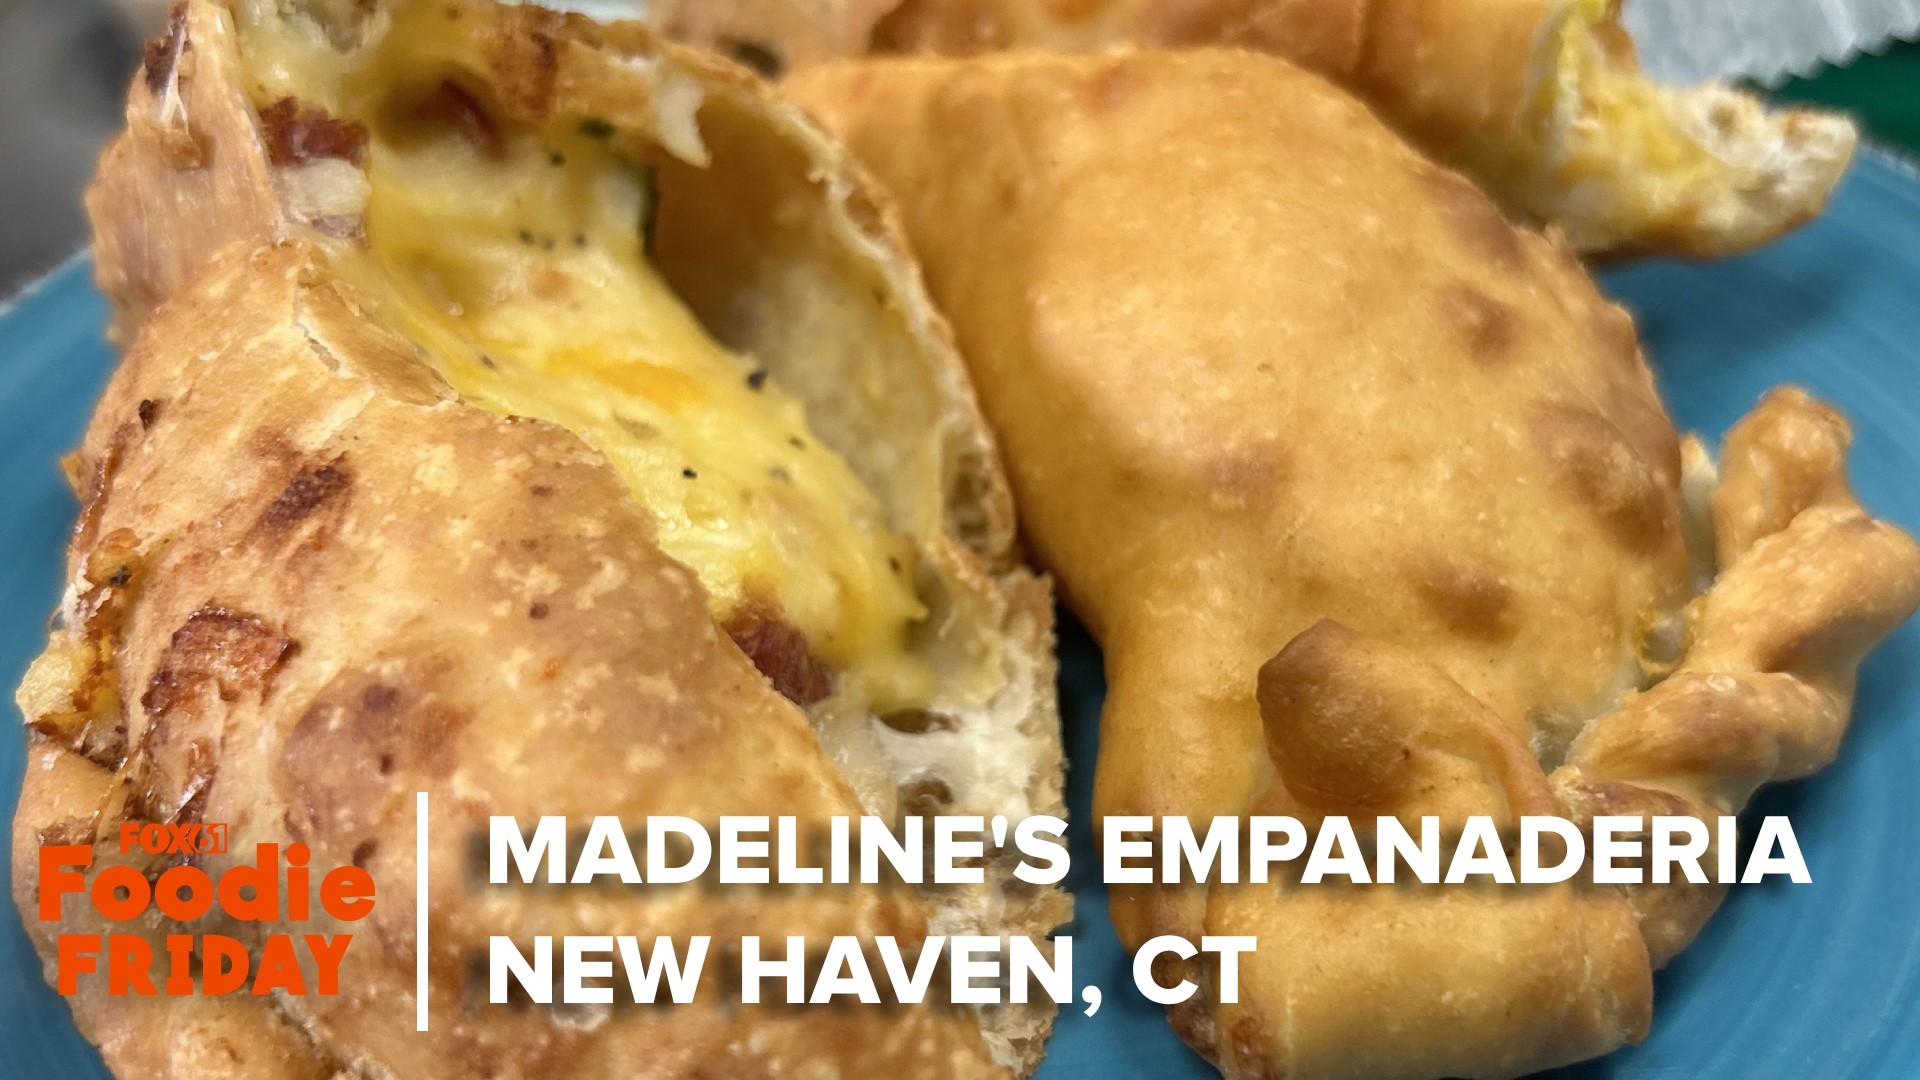 The restaurants in New Haven specializes in all things empanada.